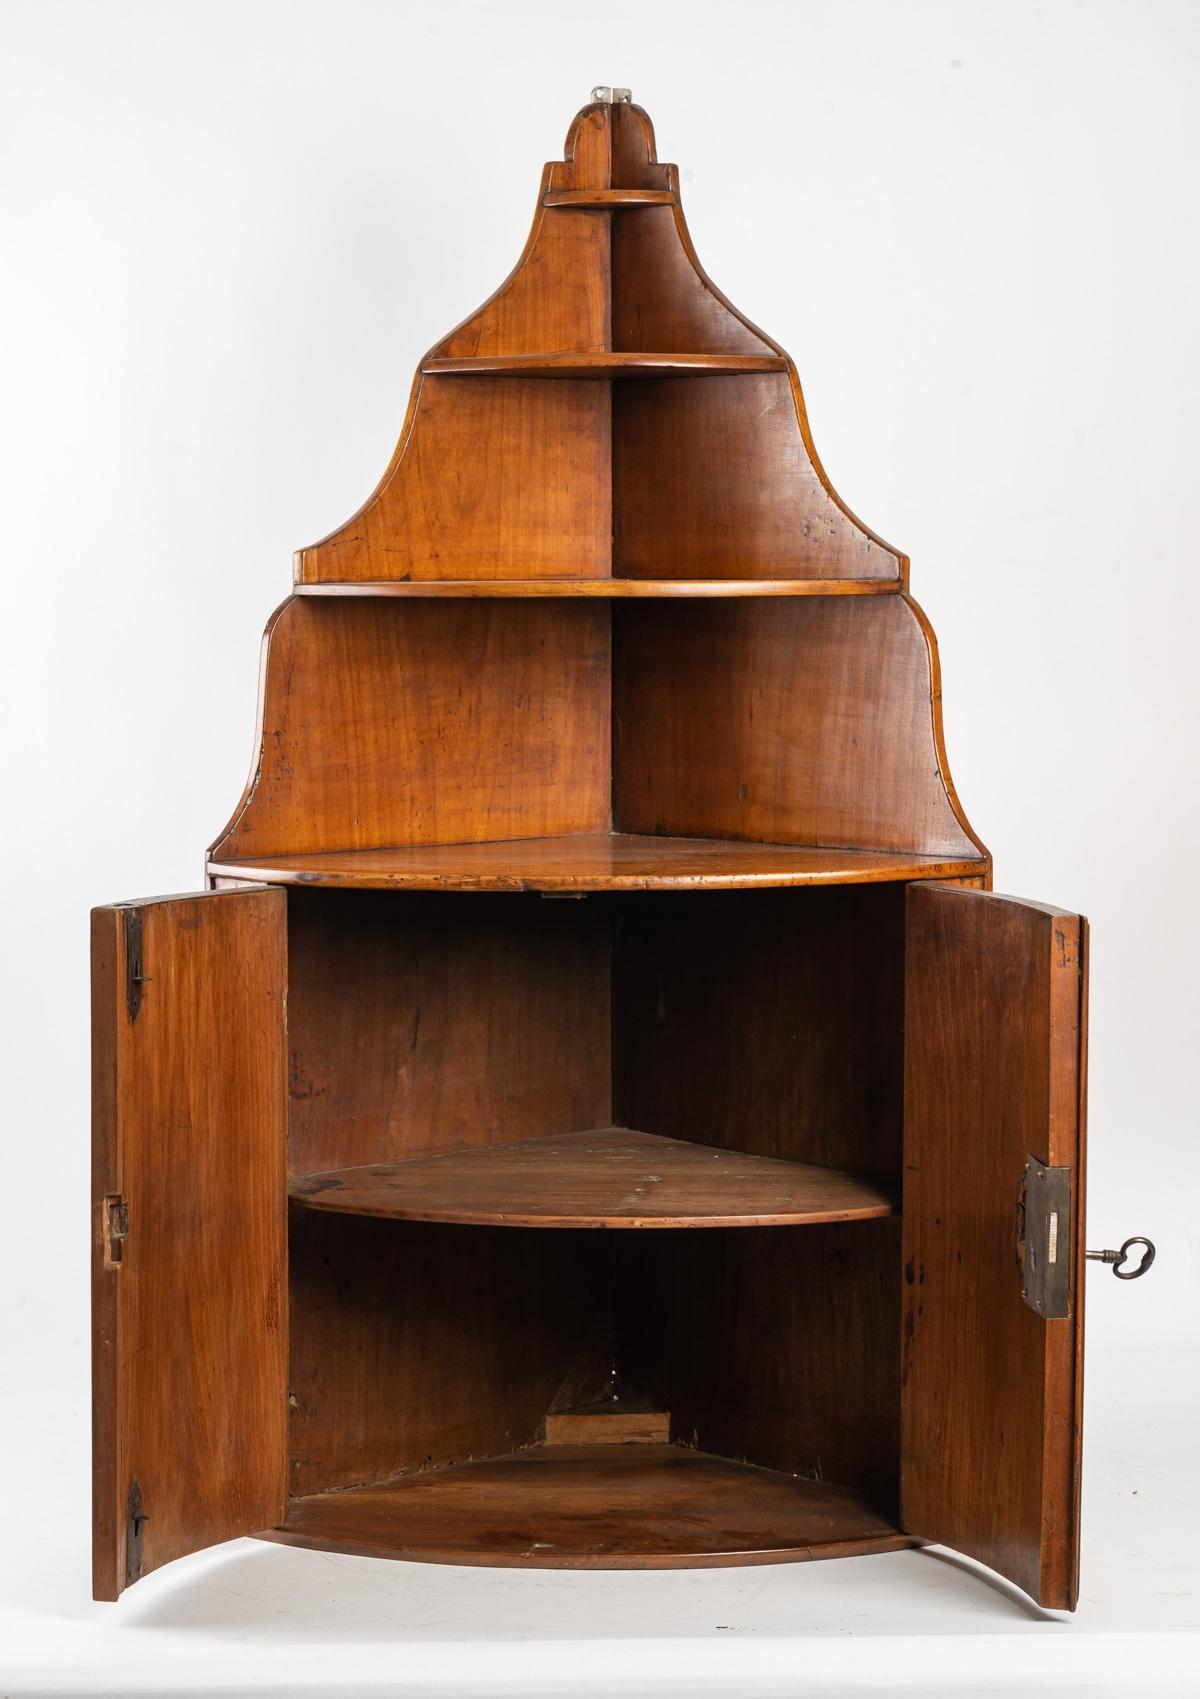 Corner to be suspended, mid-18th century (1760).

In core wood

Measures: Height 94 cm width 54 cm.